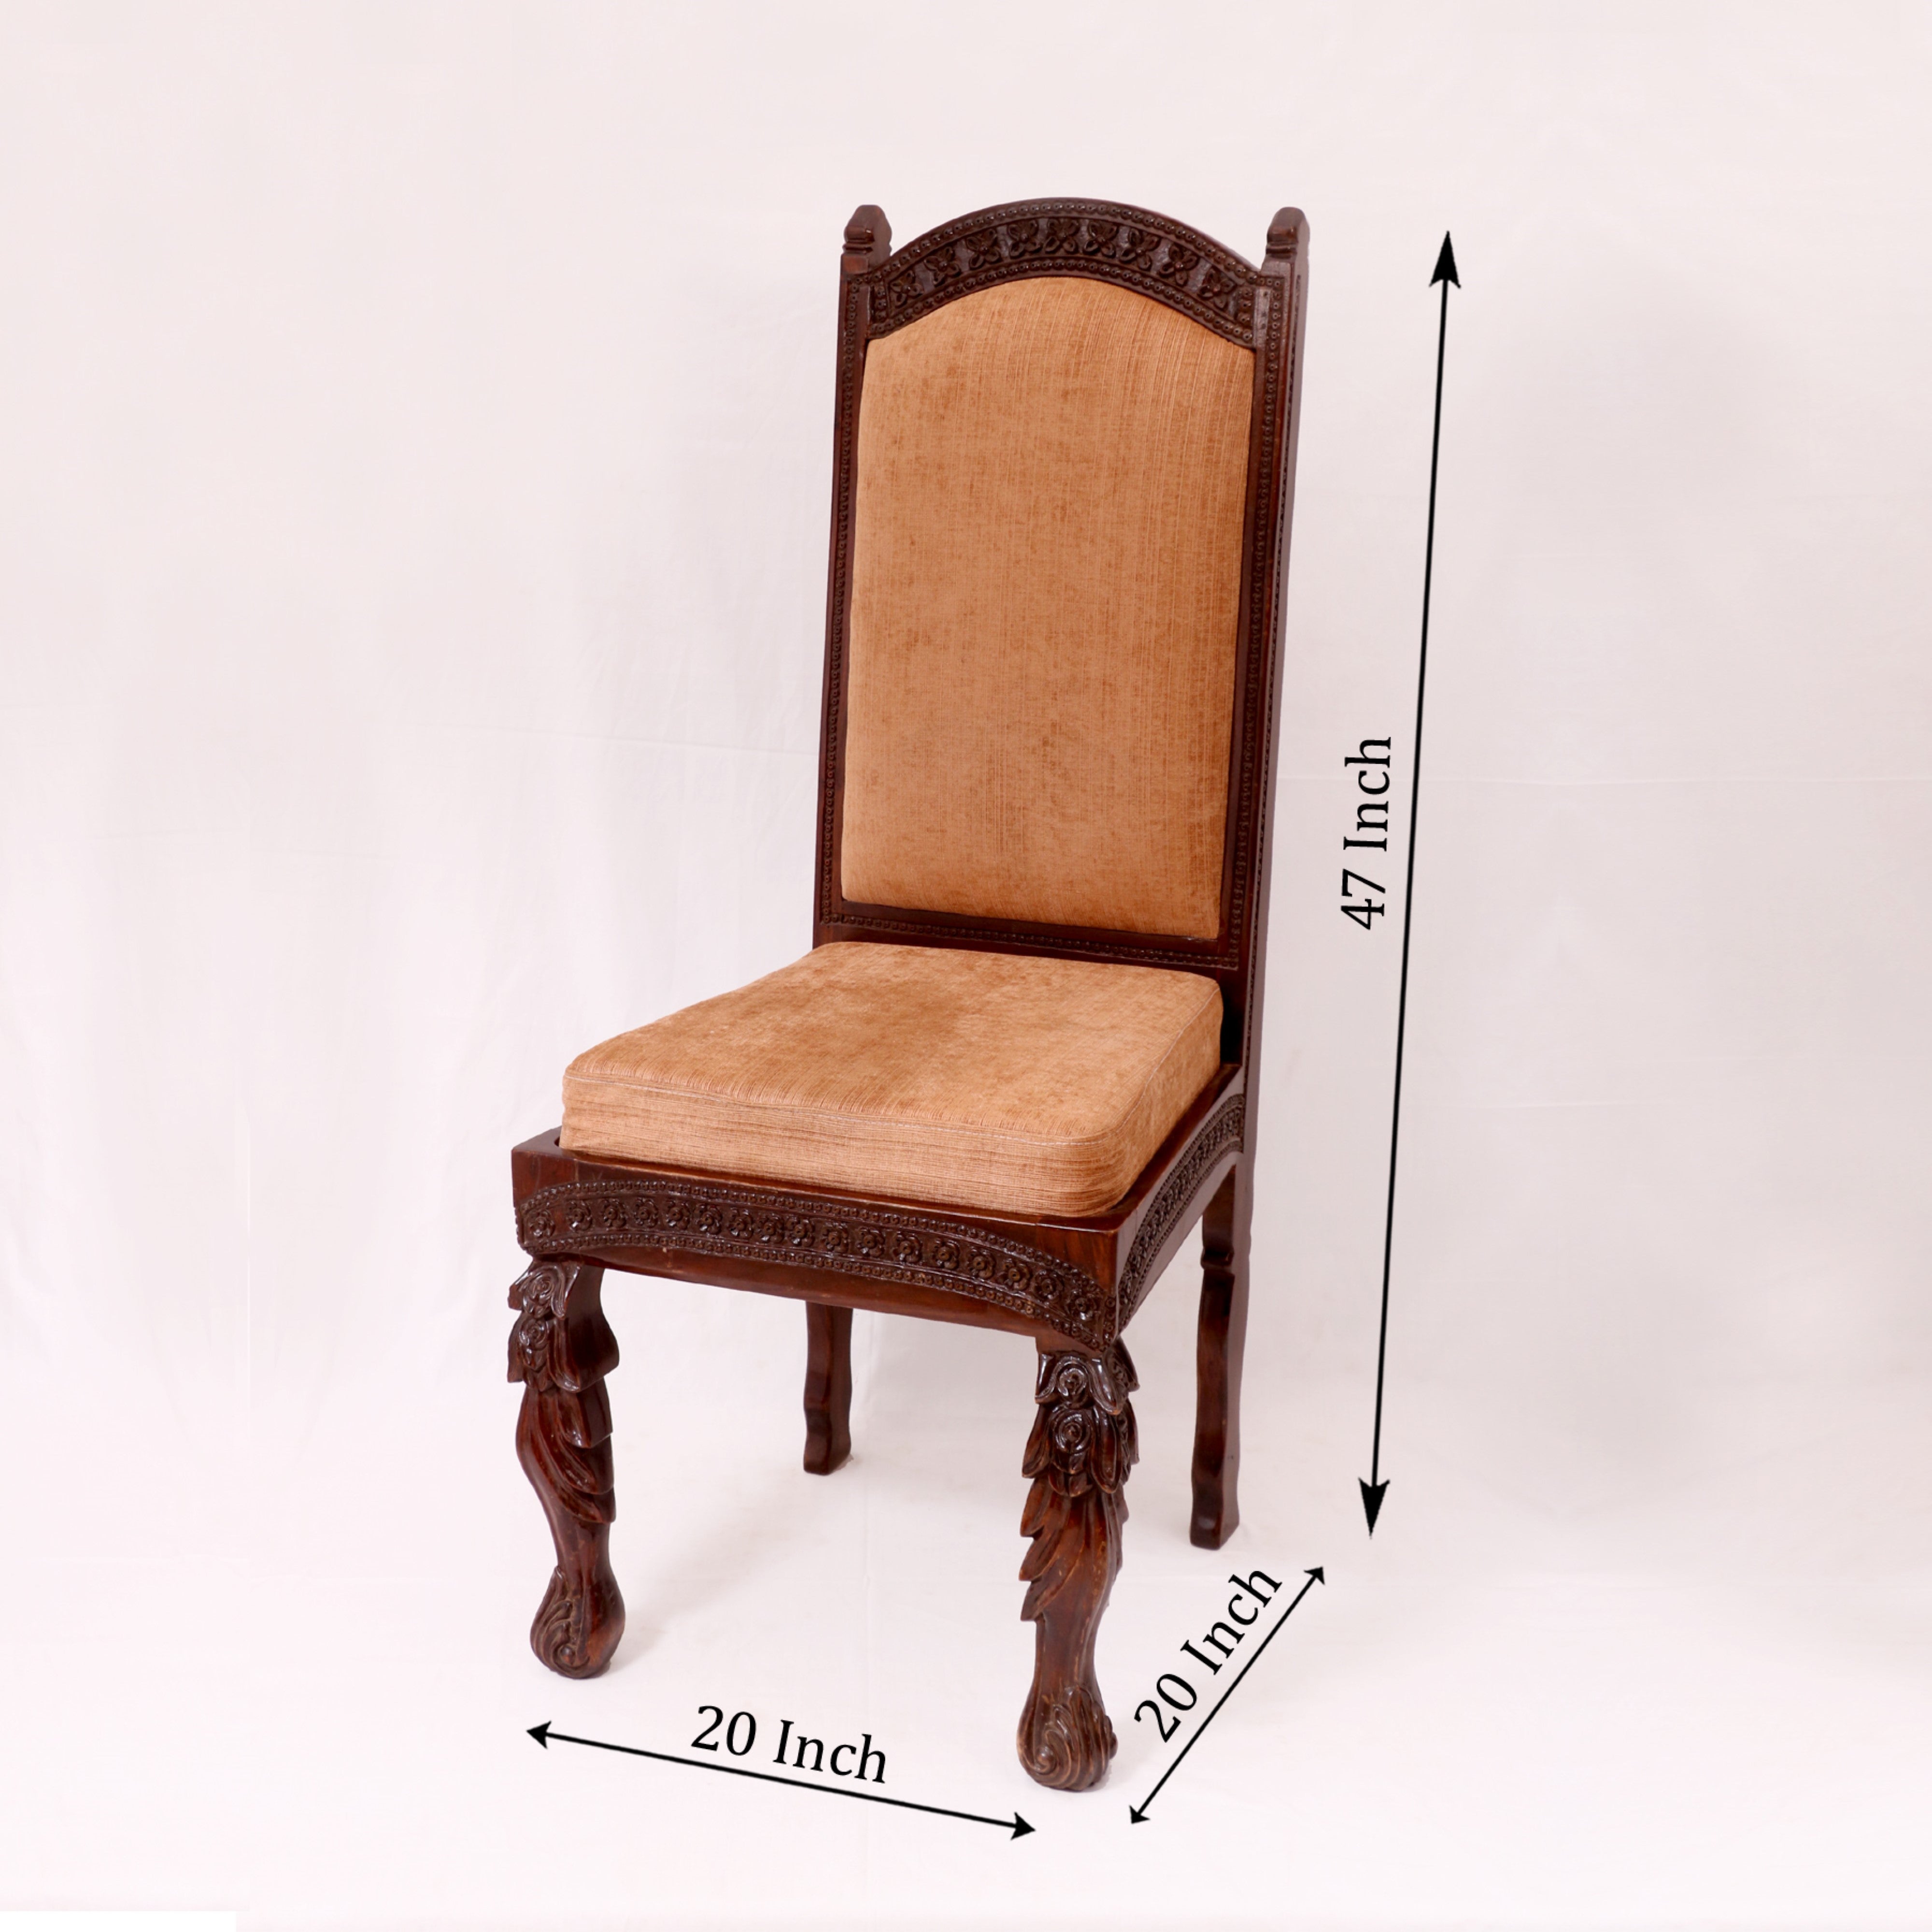 (Set of 2) Majestic Long Back Wooden Dinning Chair Dining Chair